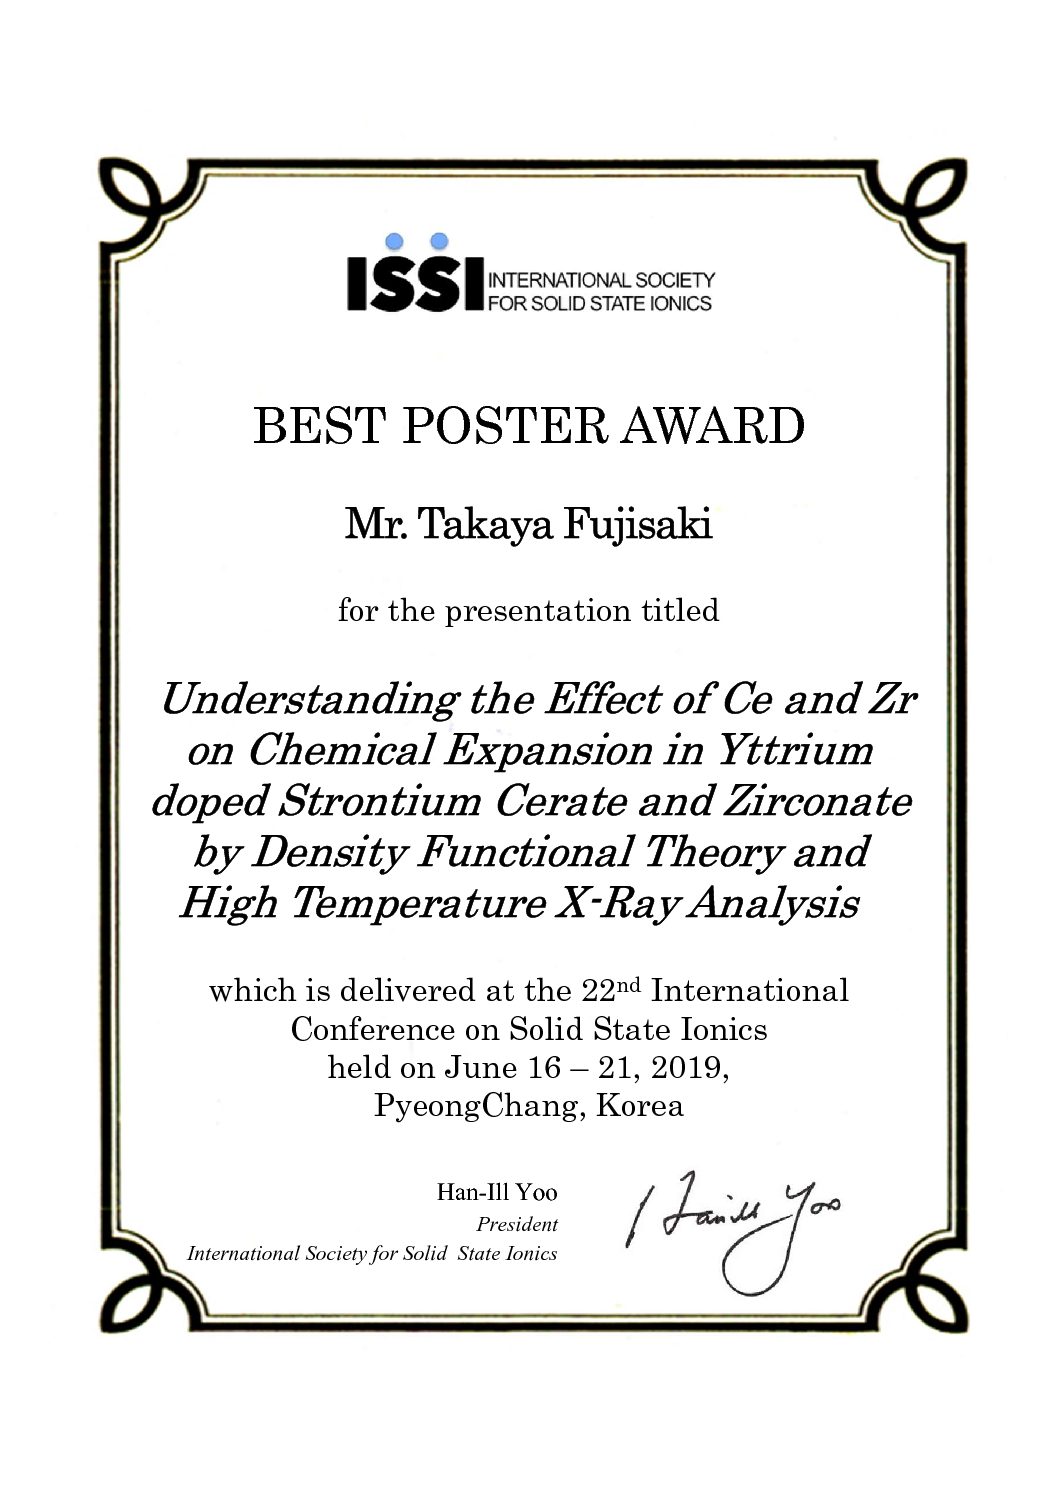 Dr. Takaya Fujisaki received the best poster awards in 22nd International Conference on Solid State Ionics.